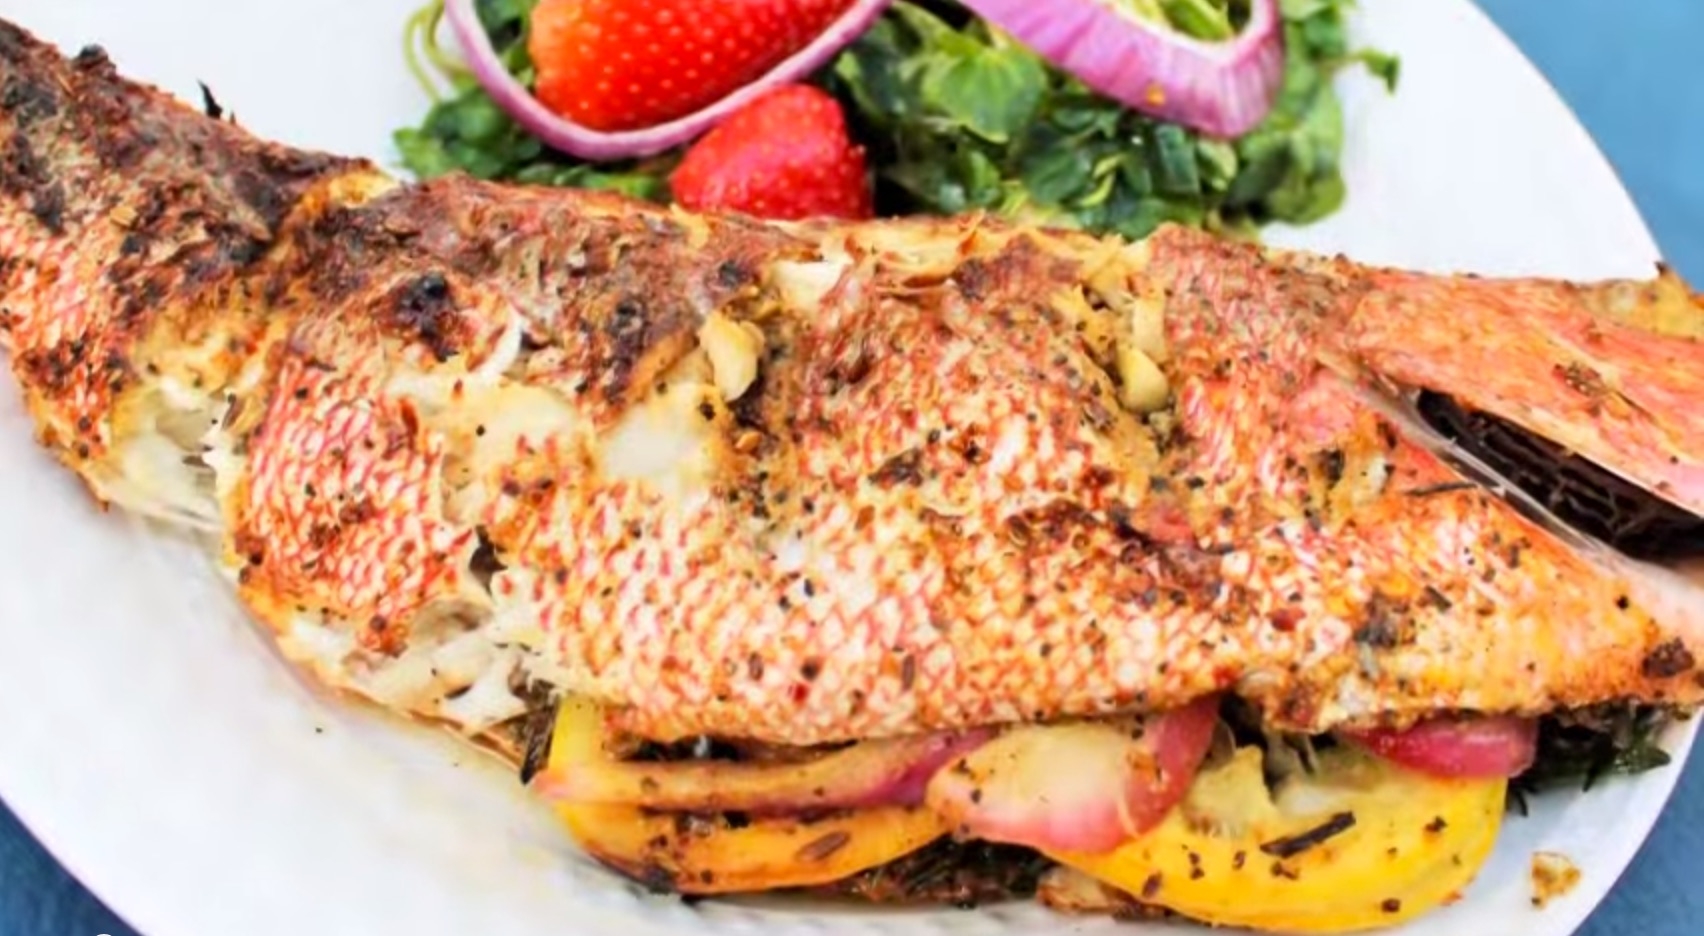 7 Amazing Do It Yourself Red Snapper Recipes,Checkers Strategy To Win